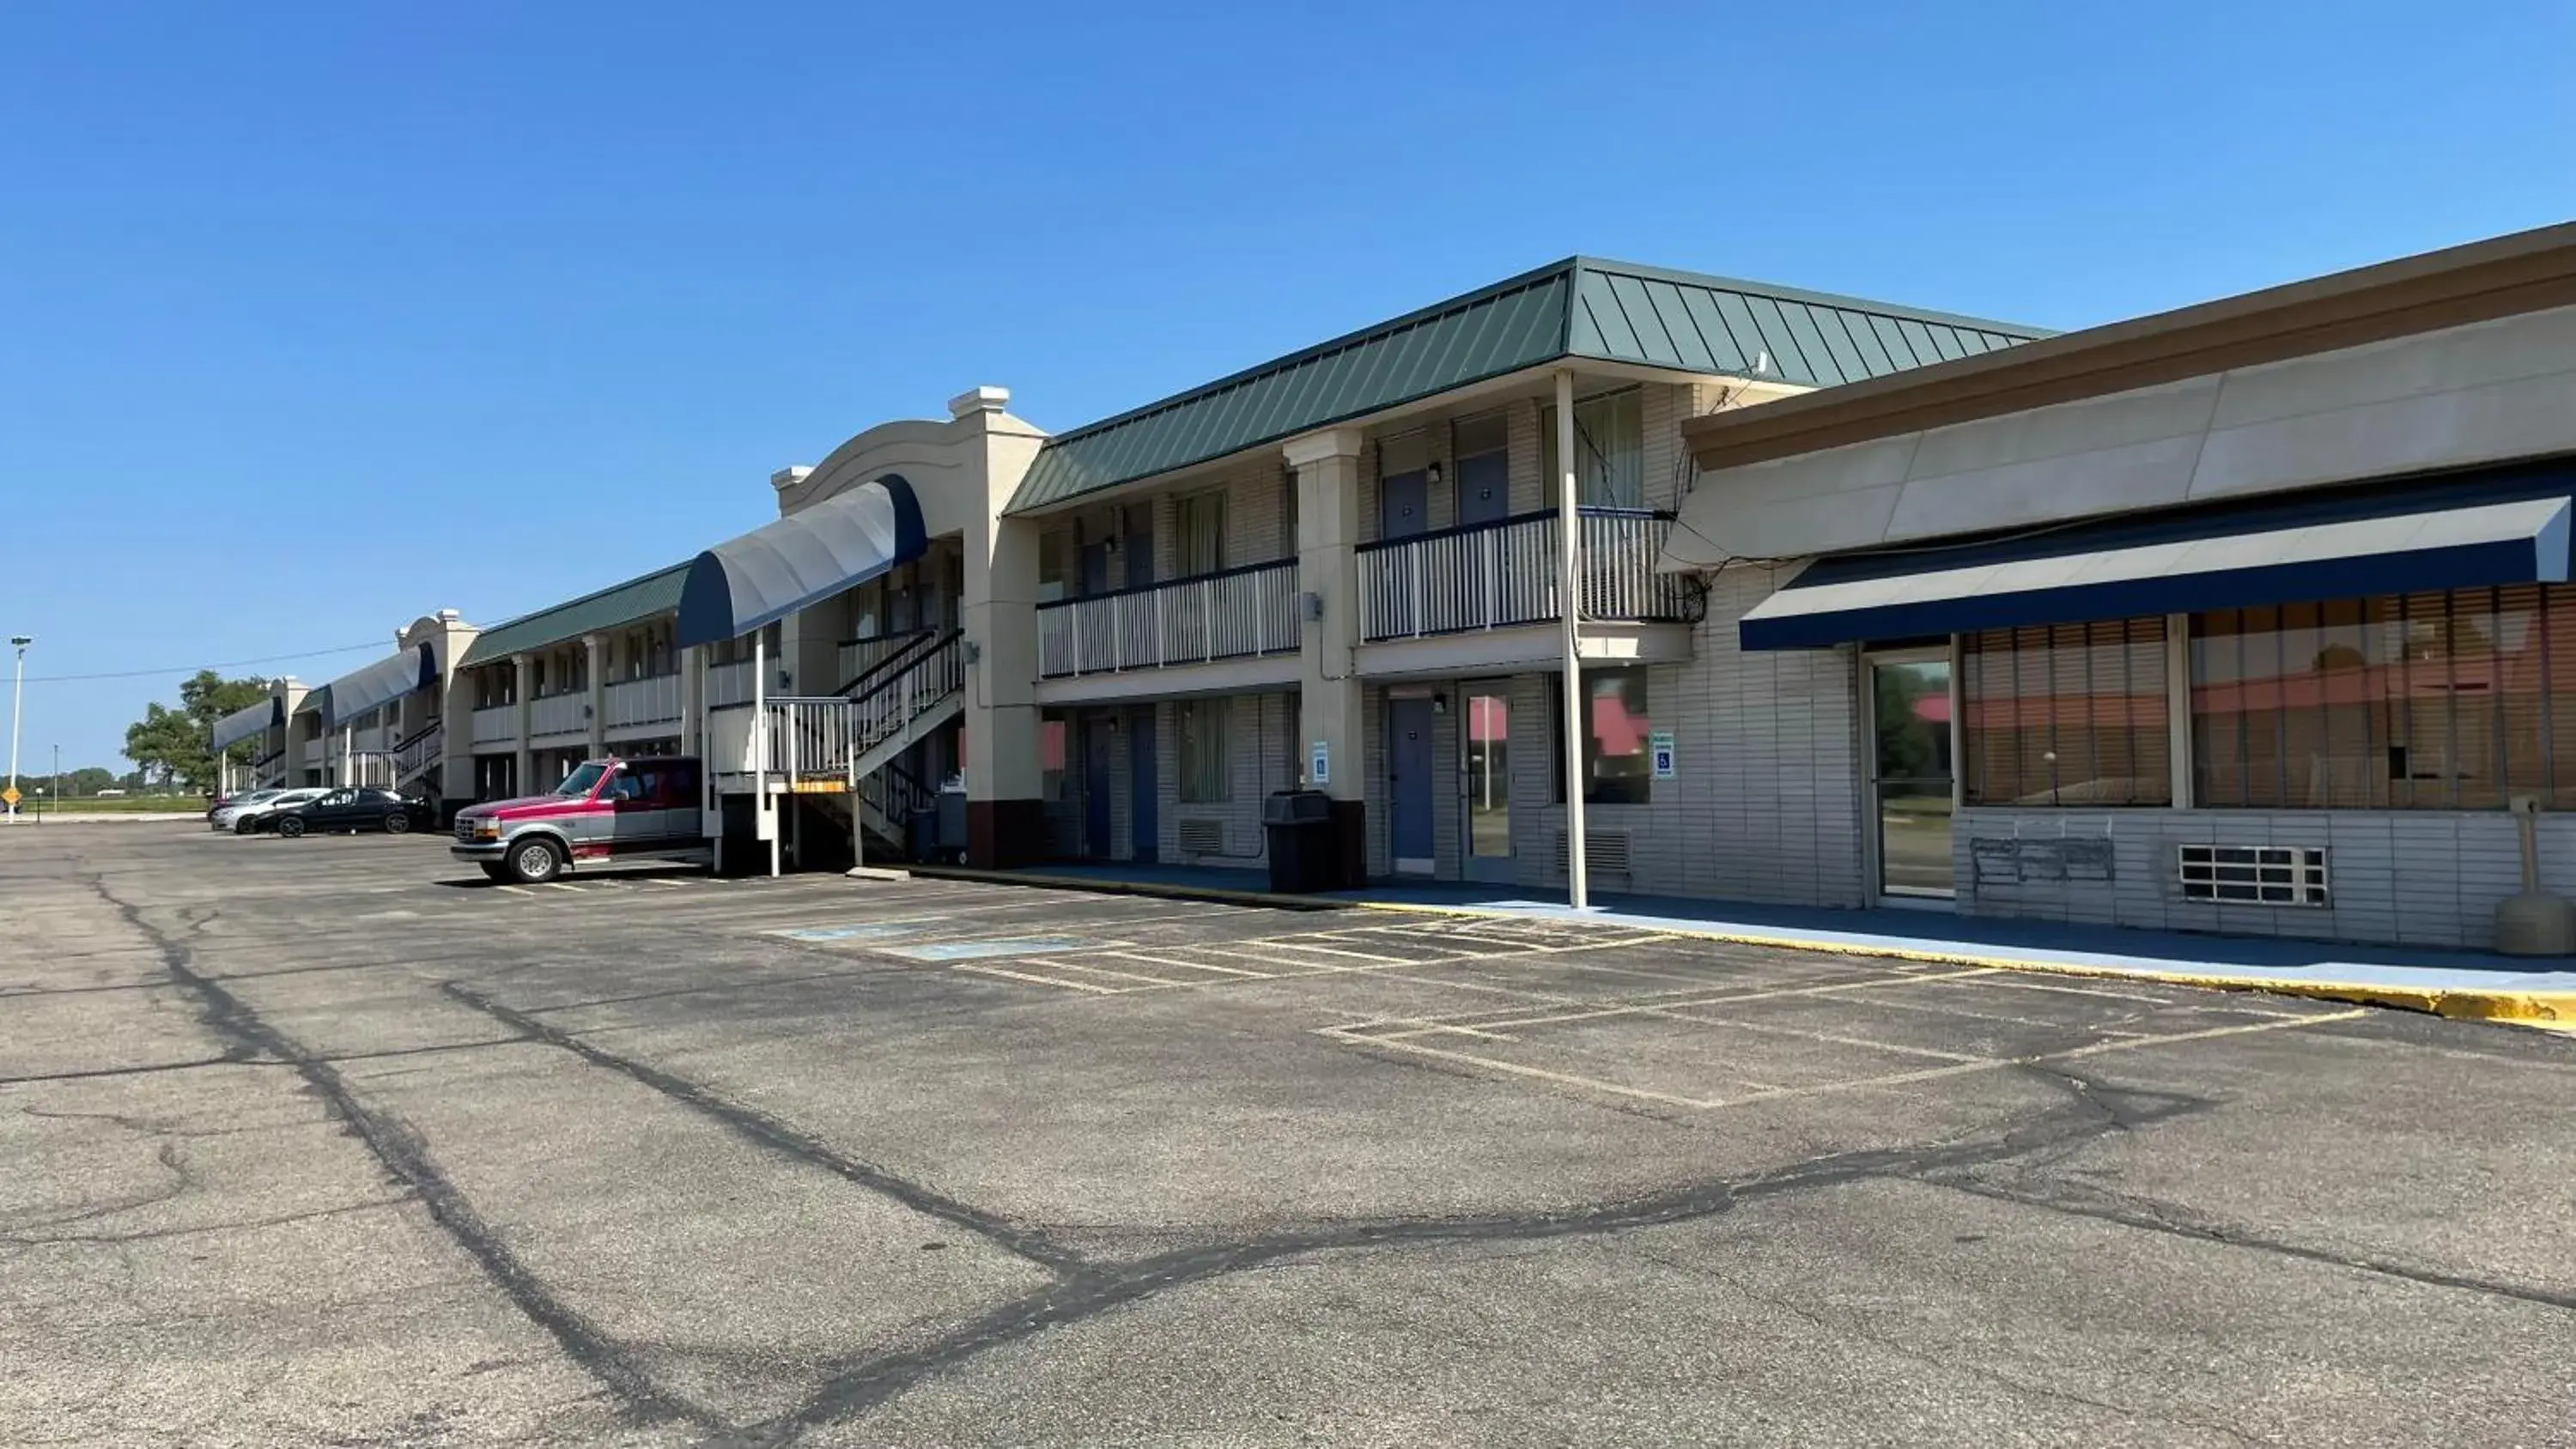 Parking, Property Building in Days Inn by Wyndham Salina South